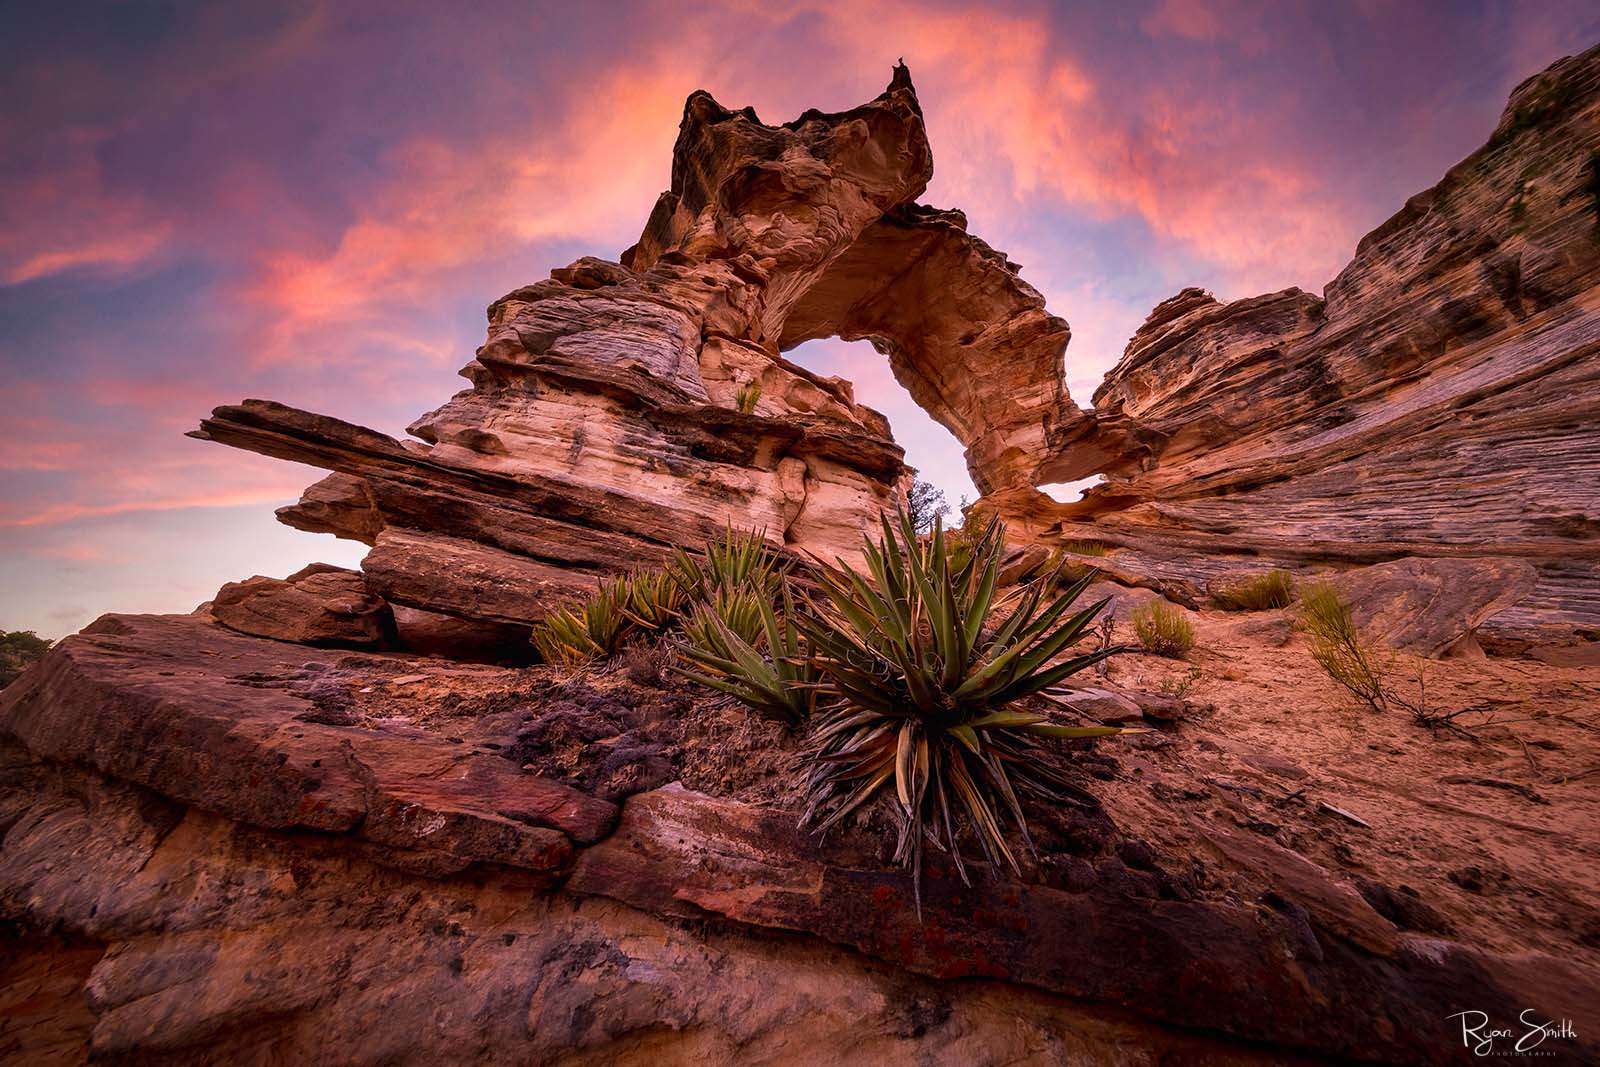 A stone arch looks like an inchworm on the canyon wall under a cotton candy sunset sky.